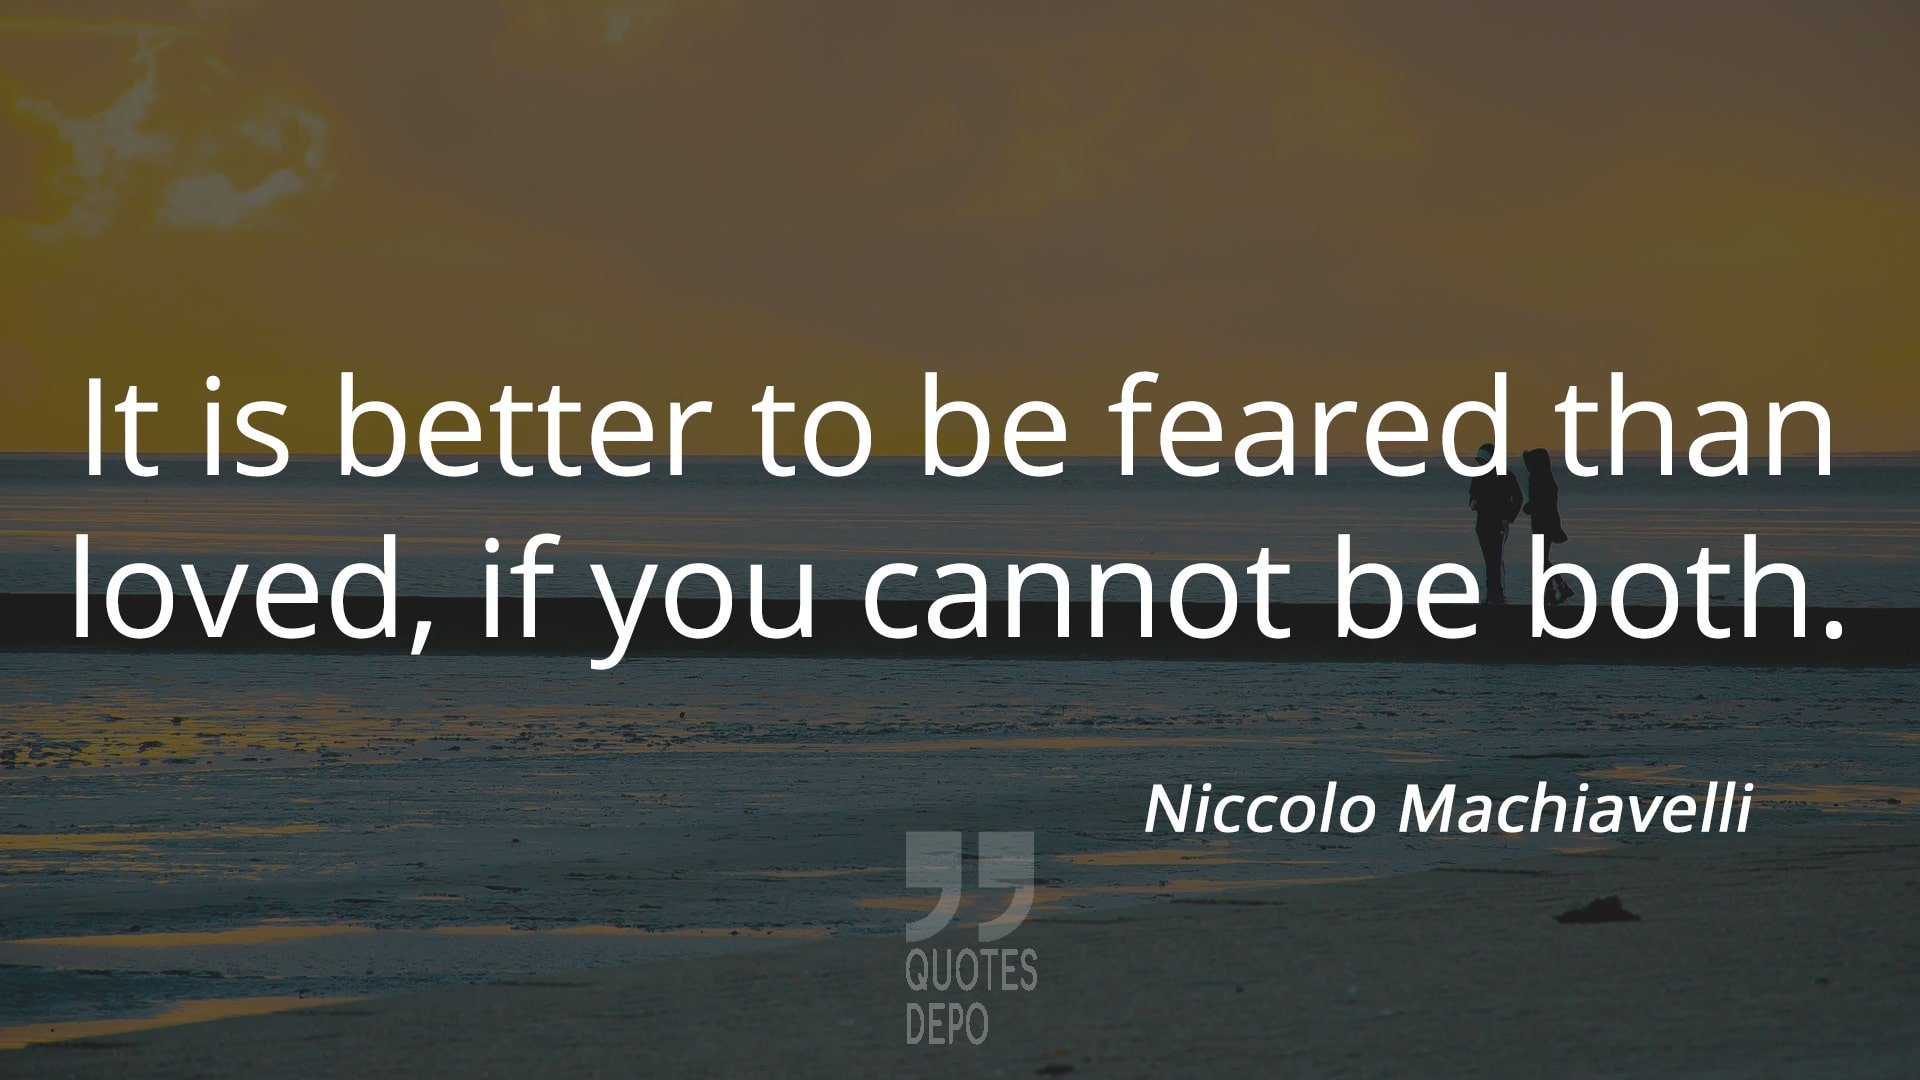 it is better to be feared than loved - niccolo machiavelli quotes